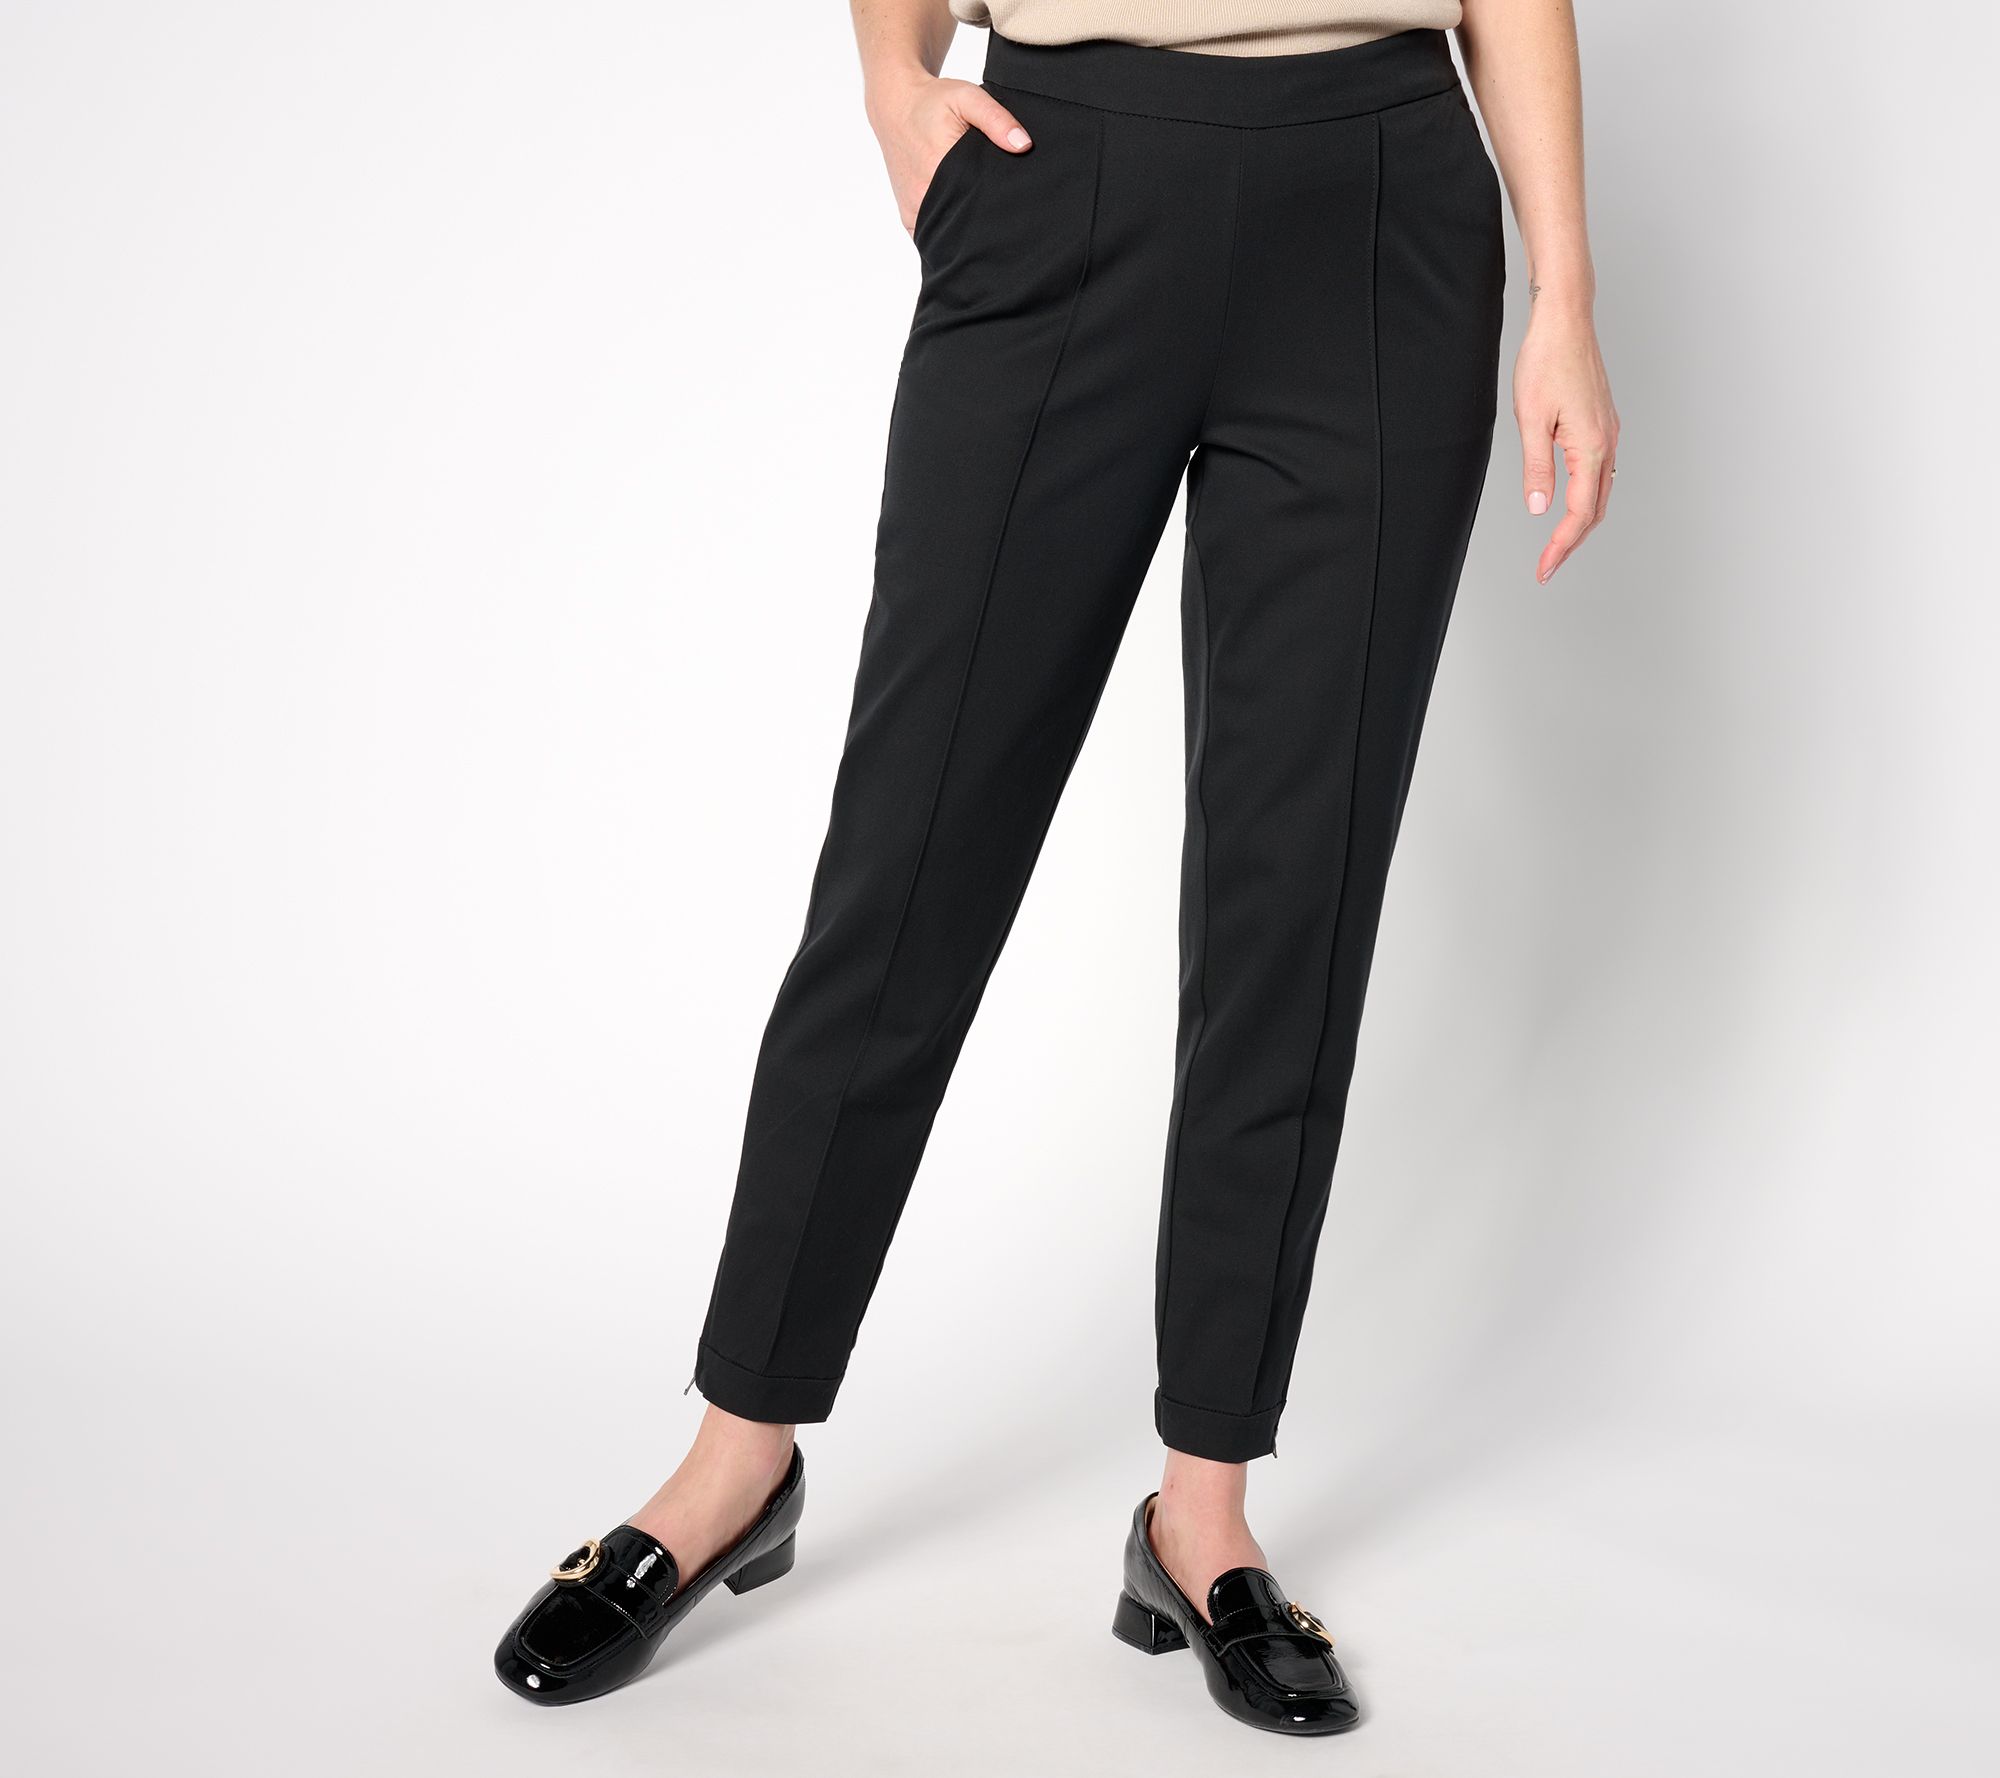 Tall Misses X-Large (18-20) - Pull-on - Ankle Pants 